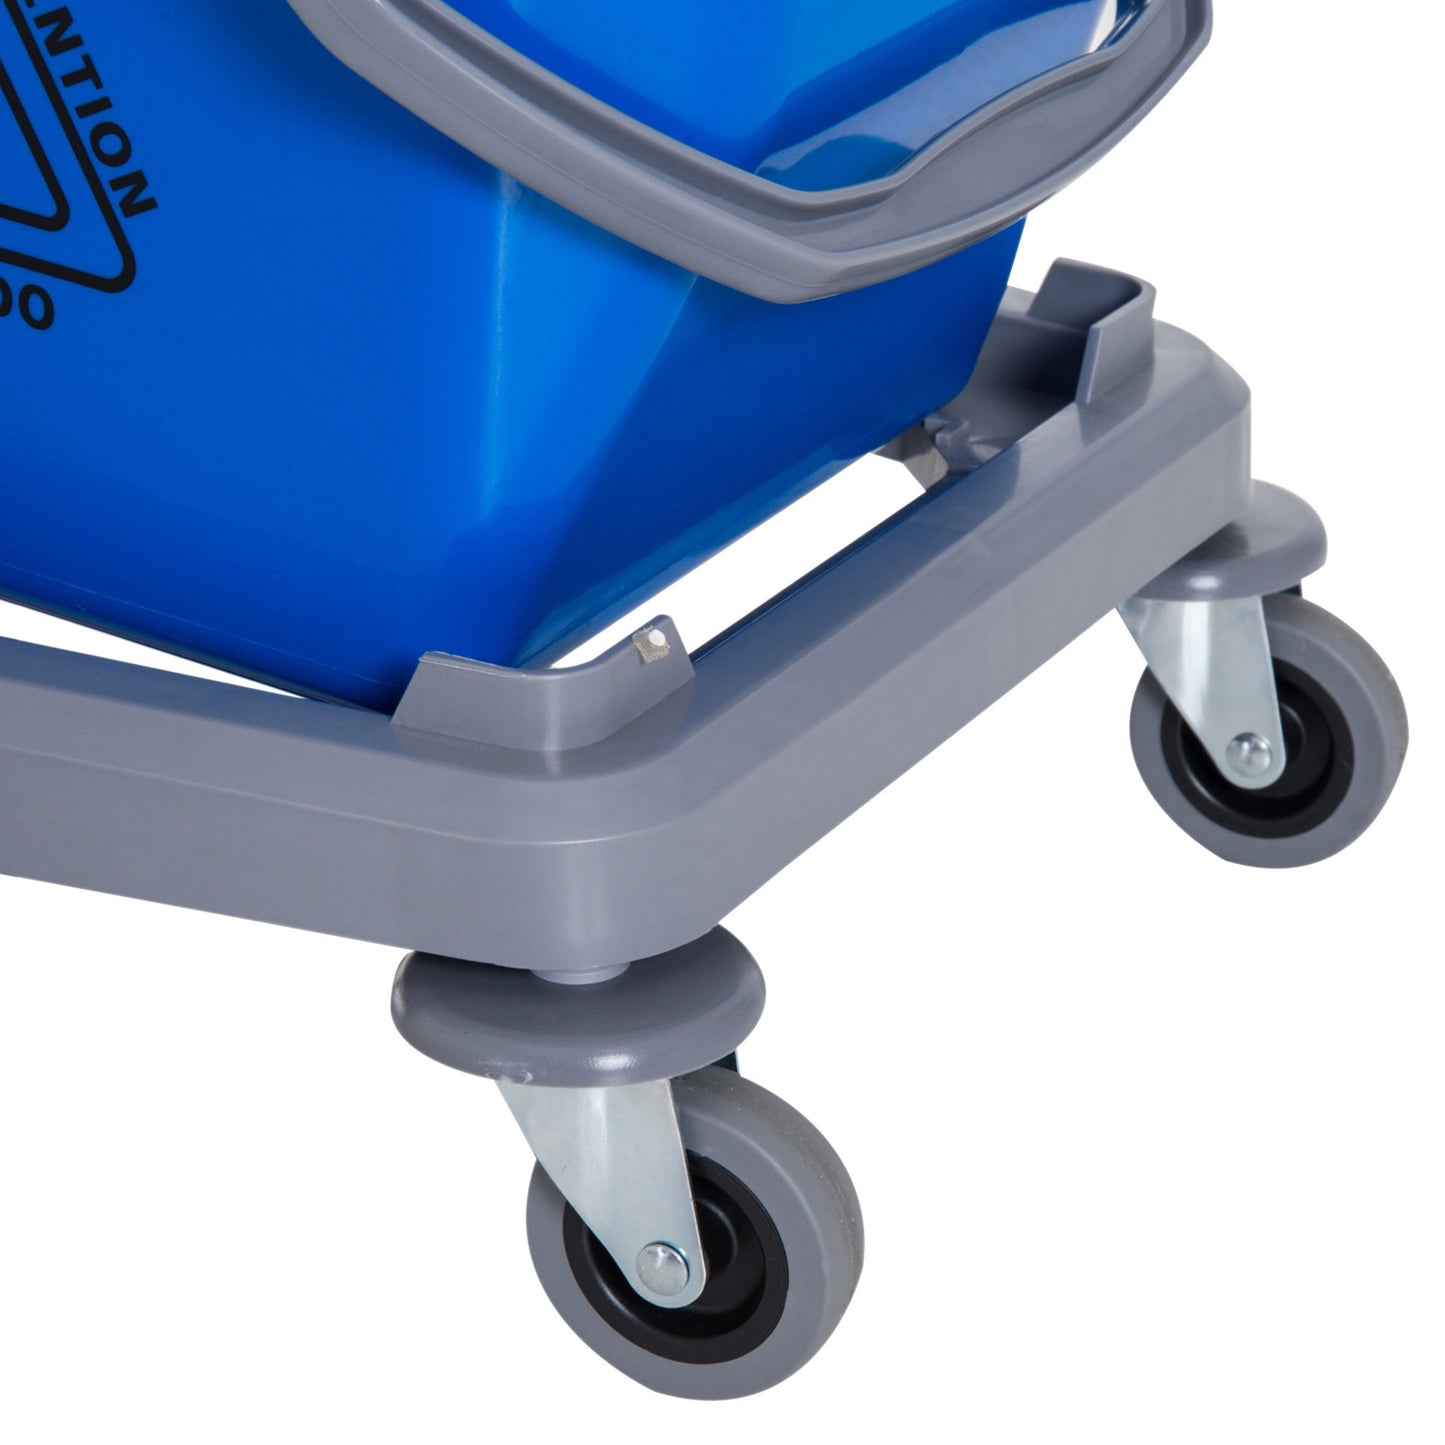 Nancy's B Lake Cleaning Trolley - Cleaning trolley with 2 buckets - Mop trolley with 4 swivel wheels